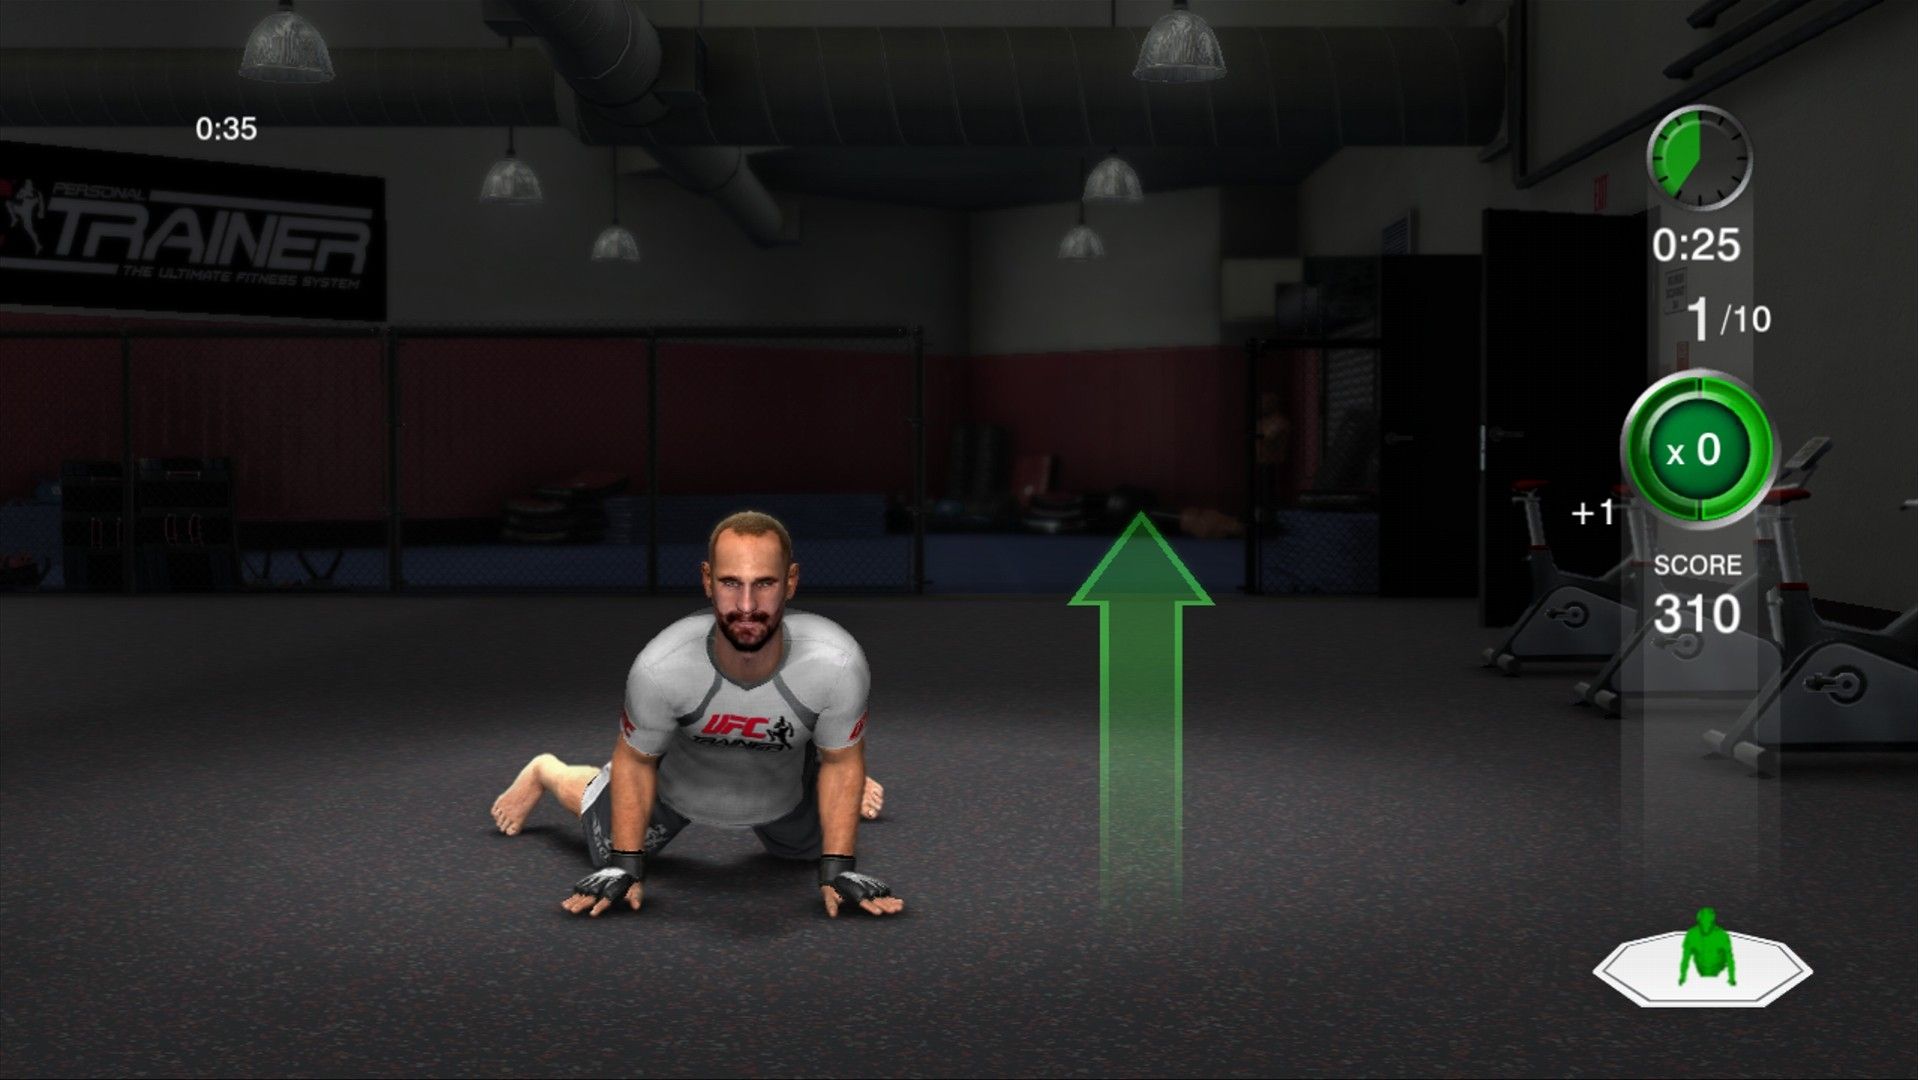 Игра про тренера. UFC personal Trainer. Xbox 360 Kinect UFC personal Trainer the Ultimate Fitness System. Ultimate Fighting Championship тренера. Personal Trainer личный тренер игра.